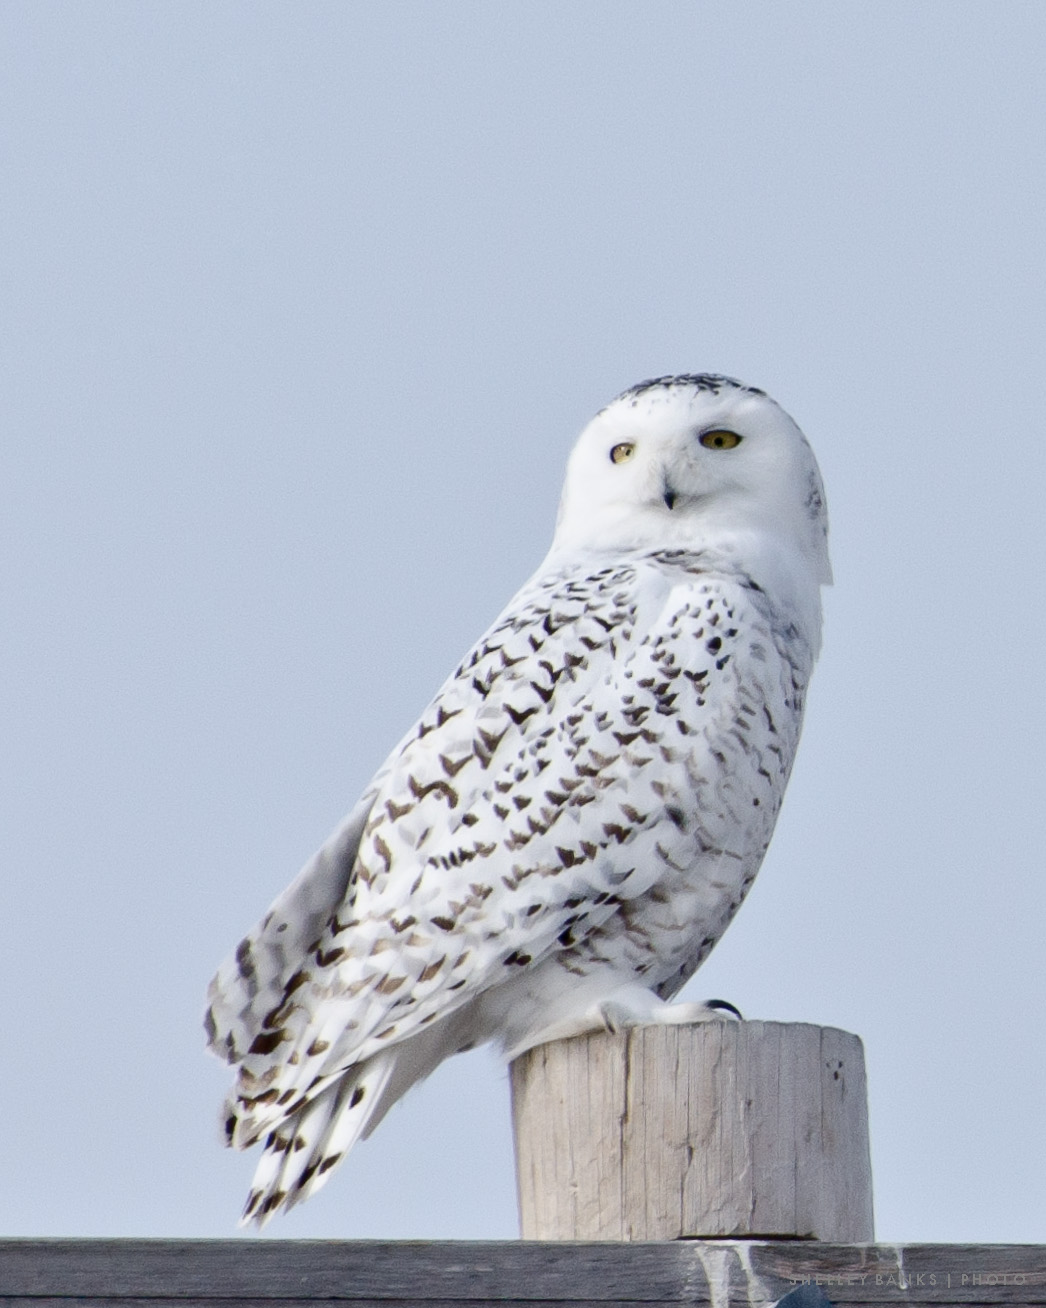 Prairie Nature: Fewer Snowy Owls - are they heading north, away from ...